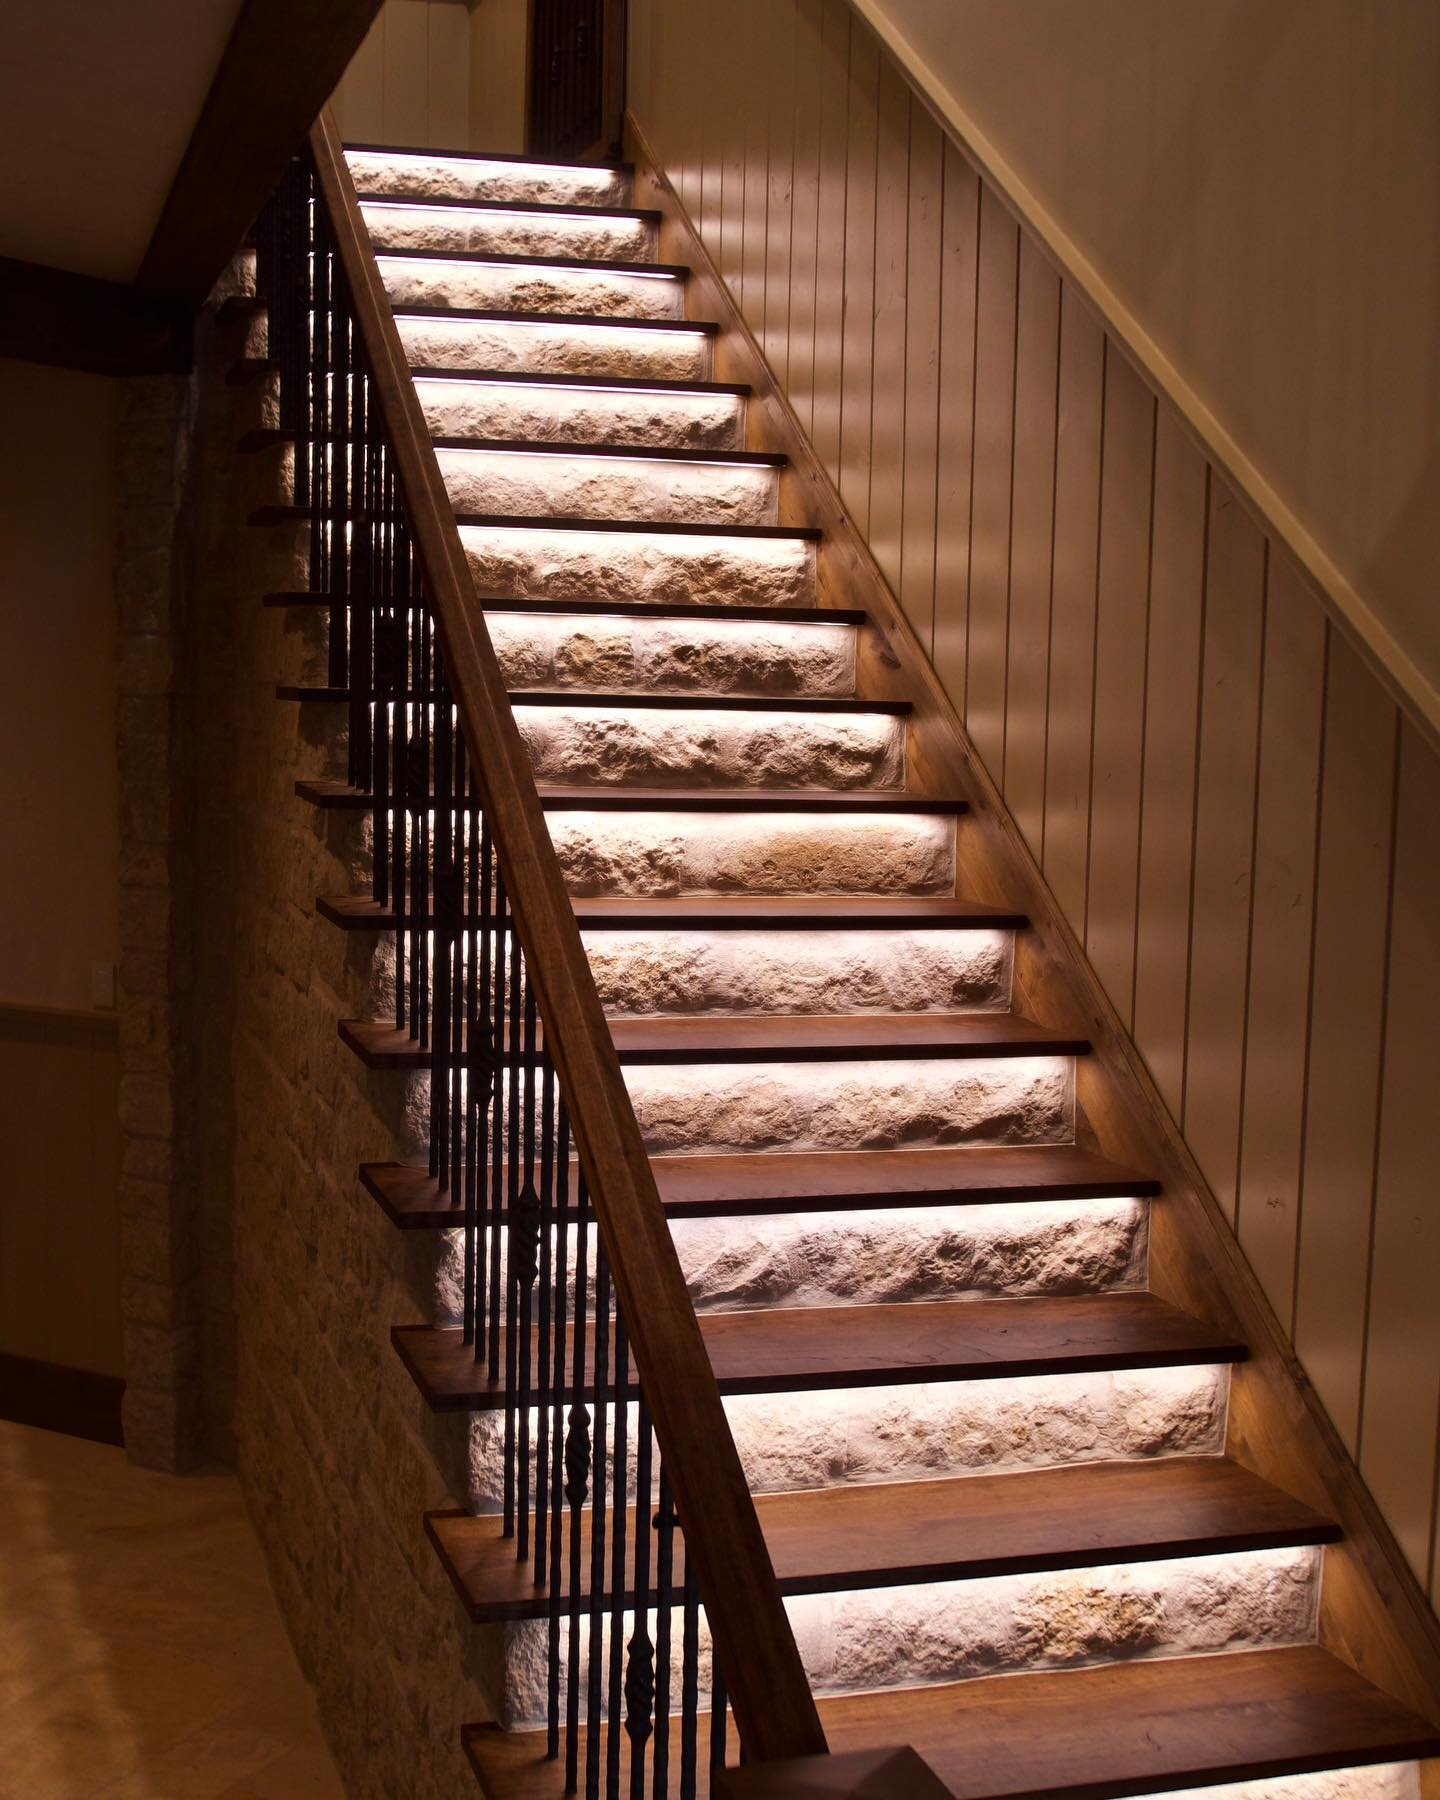 Create soft, ambient spaces with practical lighting in stairways.

LED lights positioned underneath each tread creates a hidden solution that enhances a stairway while adding an inviting glow to your home. 

#smarthome #stairlighting #homeautomation 